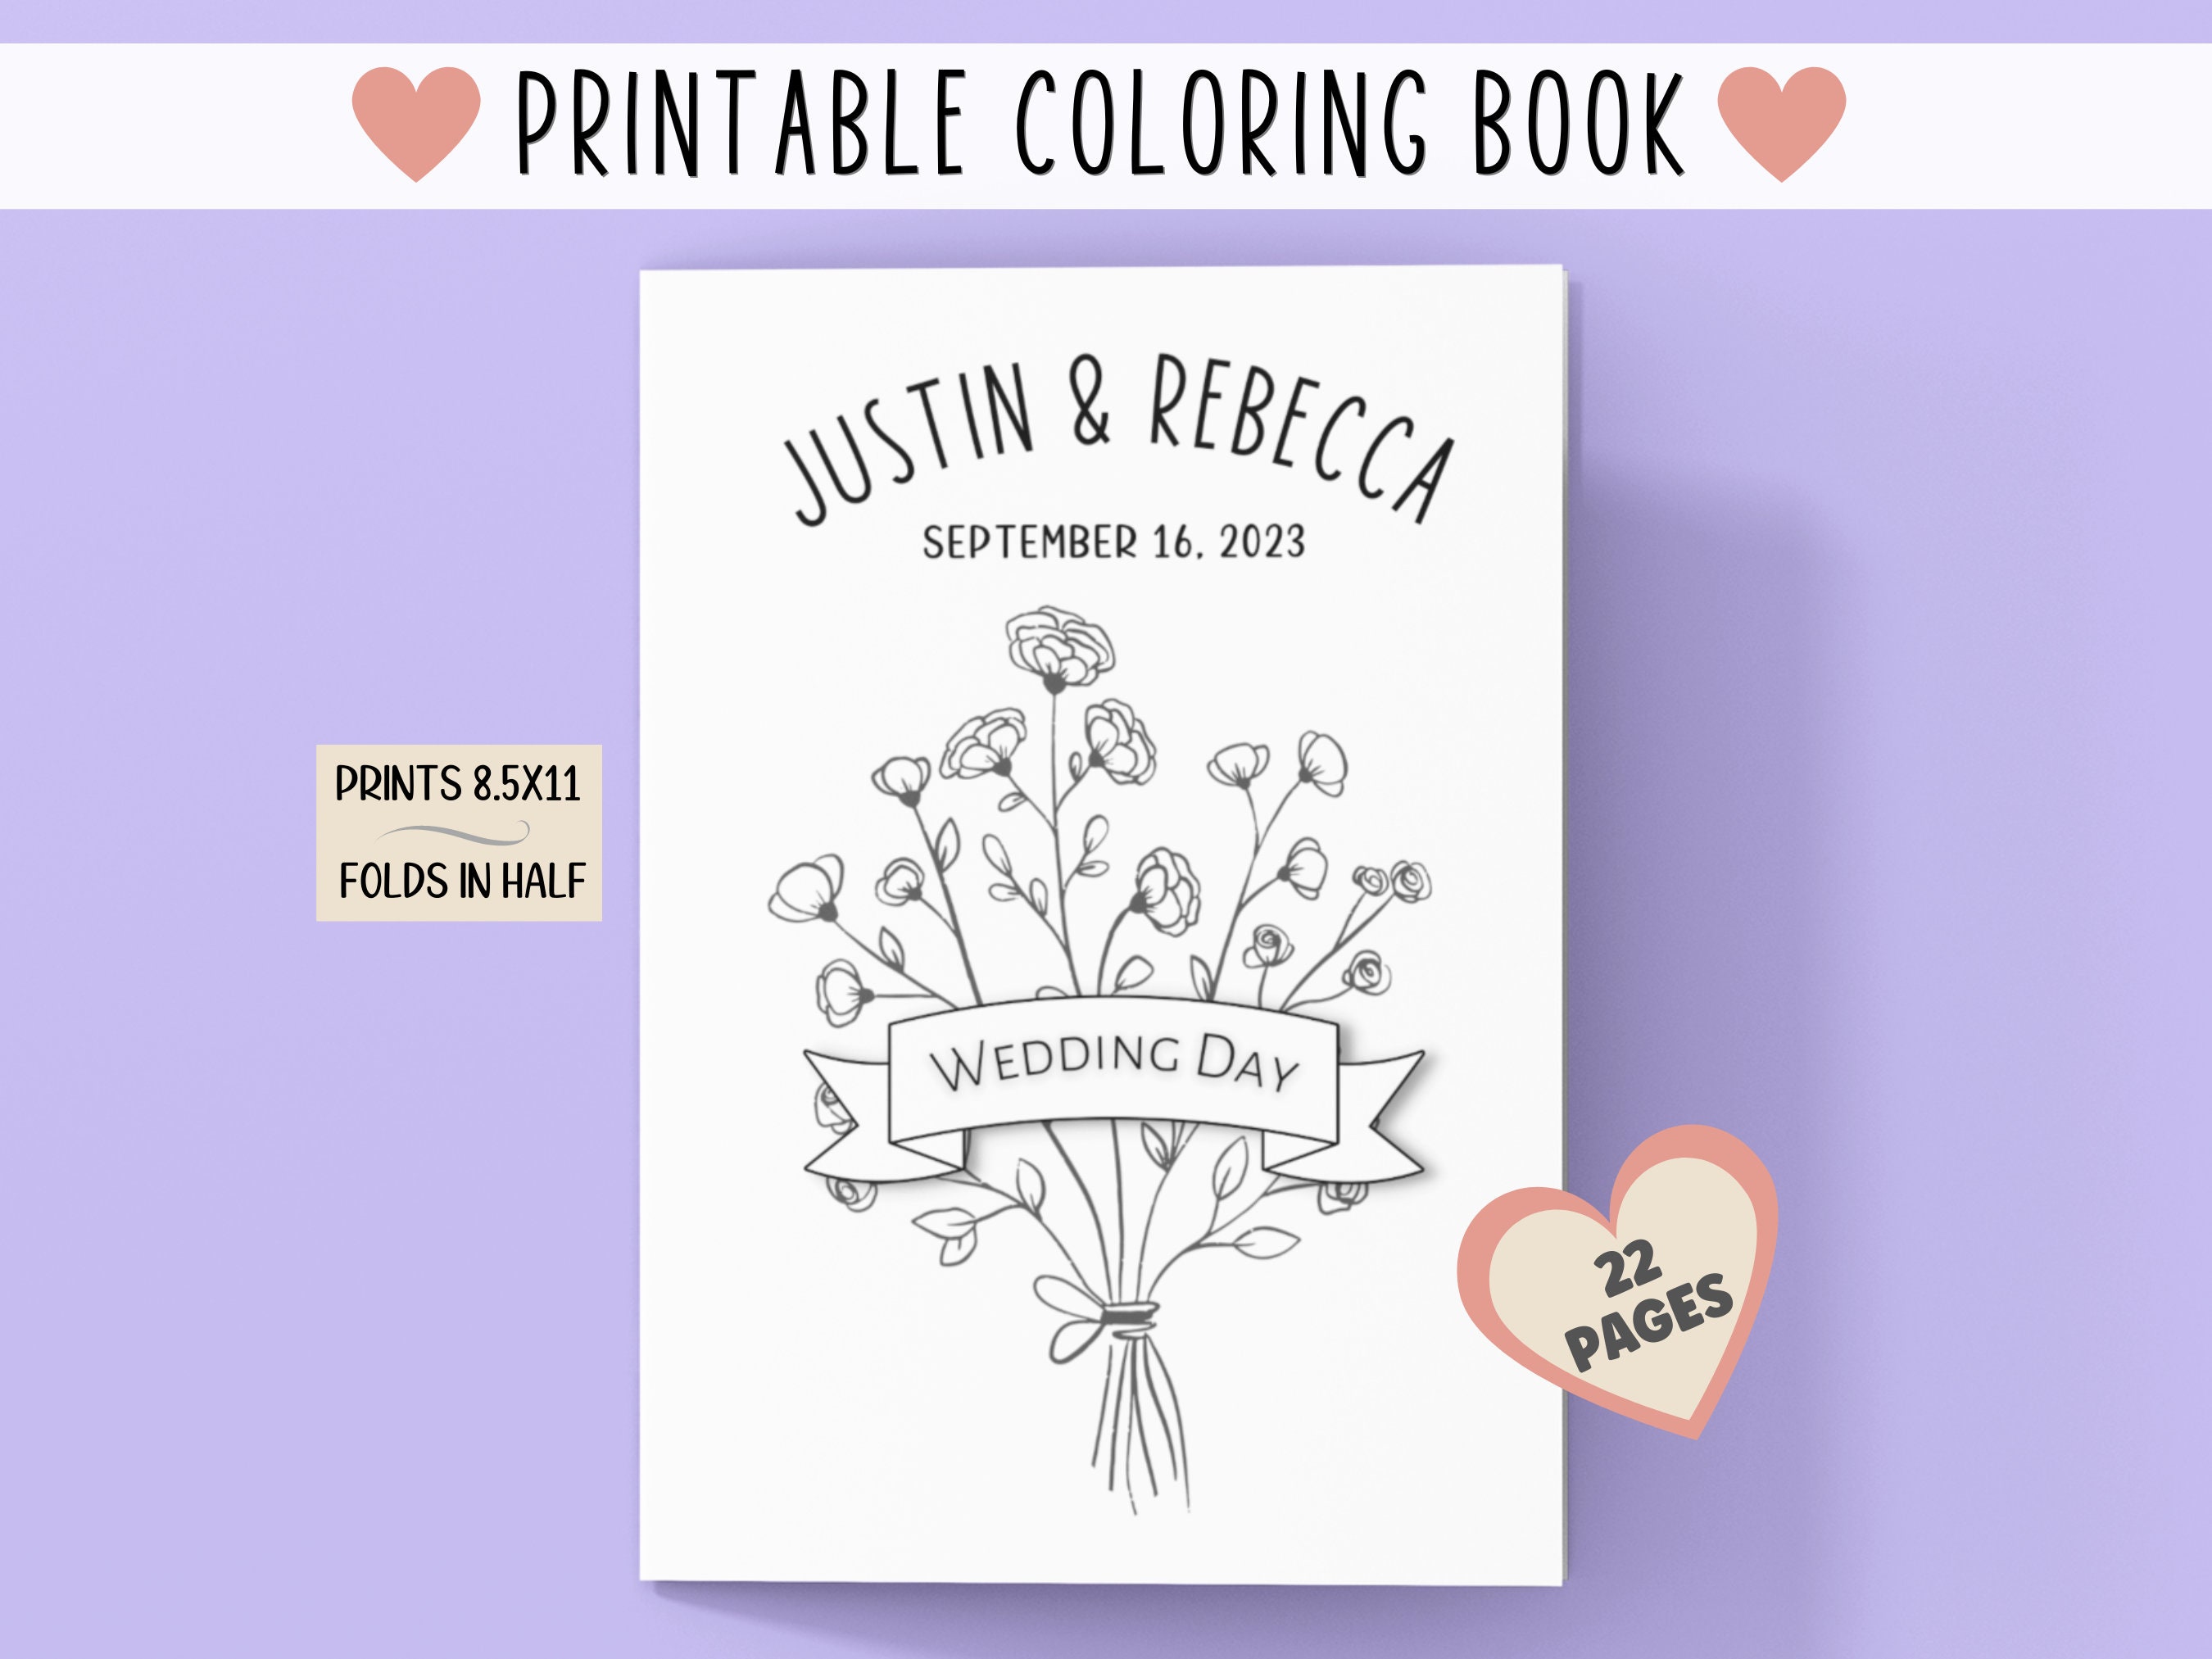 Office School Supplies ZKCCNUK German Wedding Children's Coloring Book Gift  Gift Wedding Event Coloring Book With Pen Coloring Book Set School Supplies  for kids Up to 30% off Clearance 